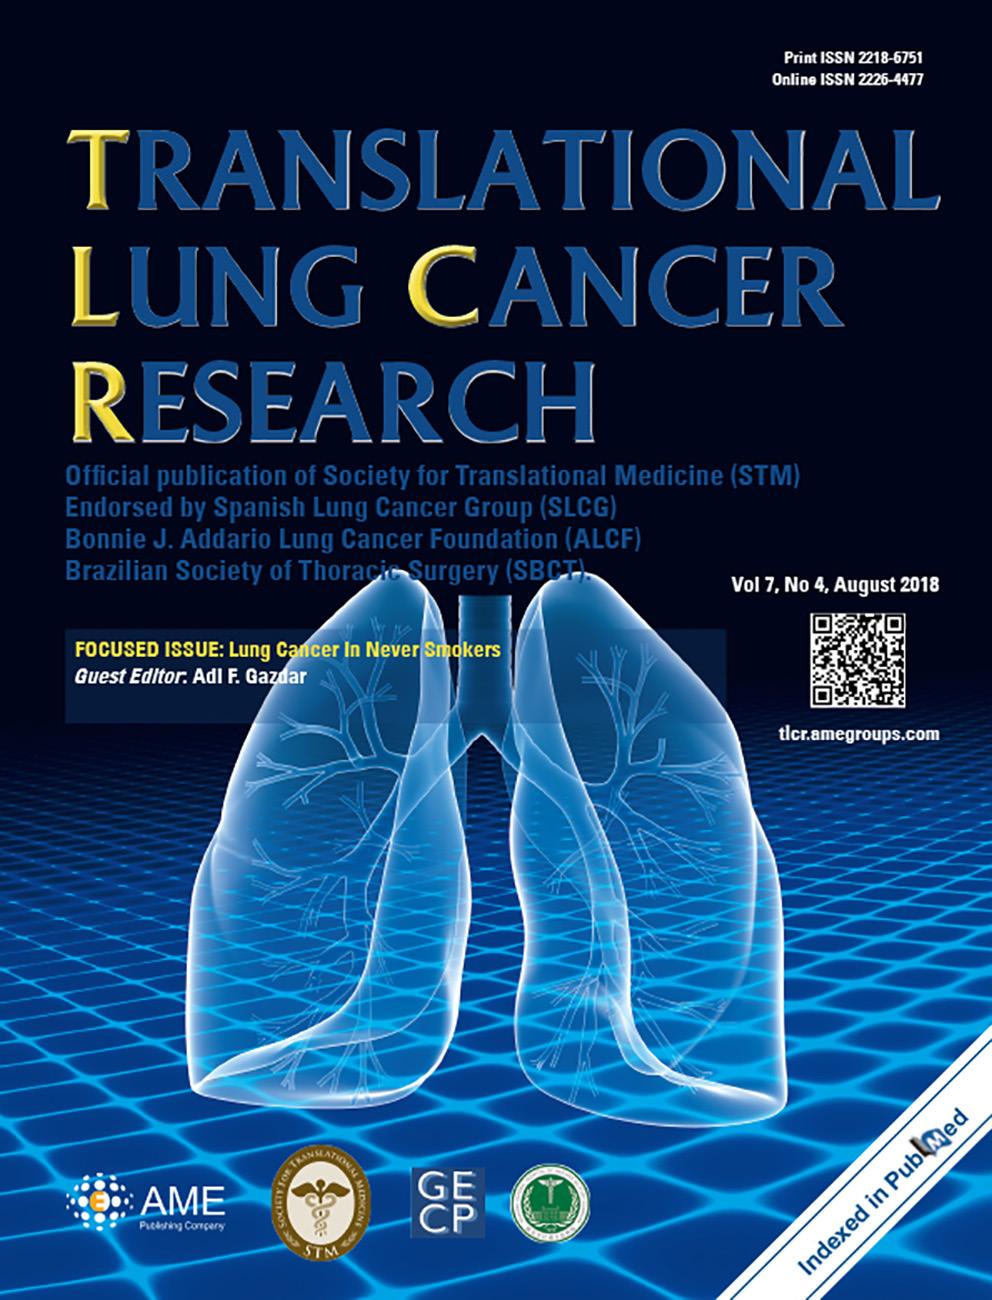 News Translational Lung Cancer Research, the 7 th AME Journal indexed in SCIE Editorial Office Editorial Office of Translational Lung Cancer Research, AME Publishing Company, Hong Kong, China